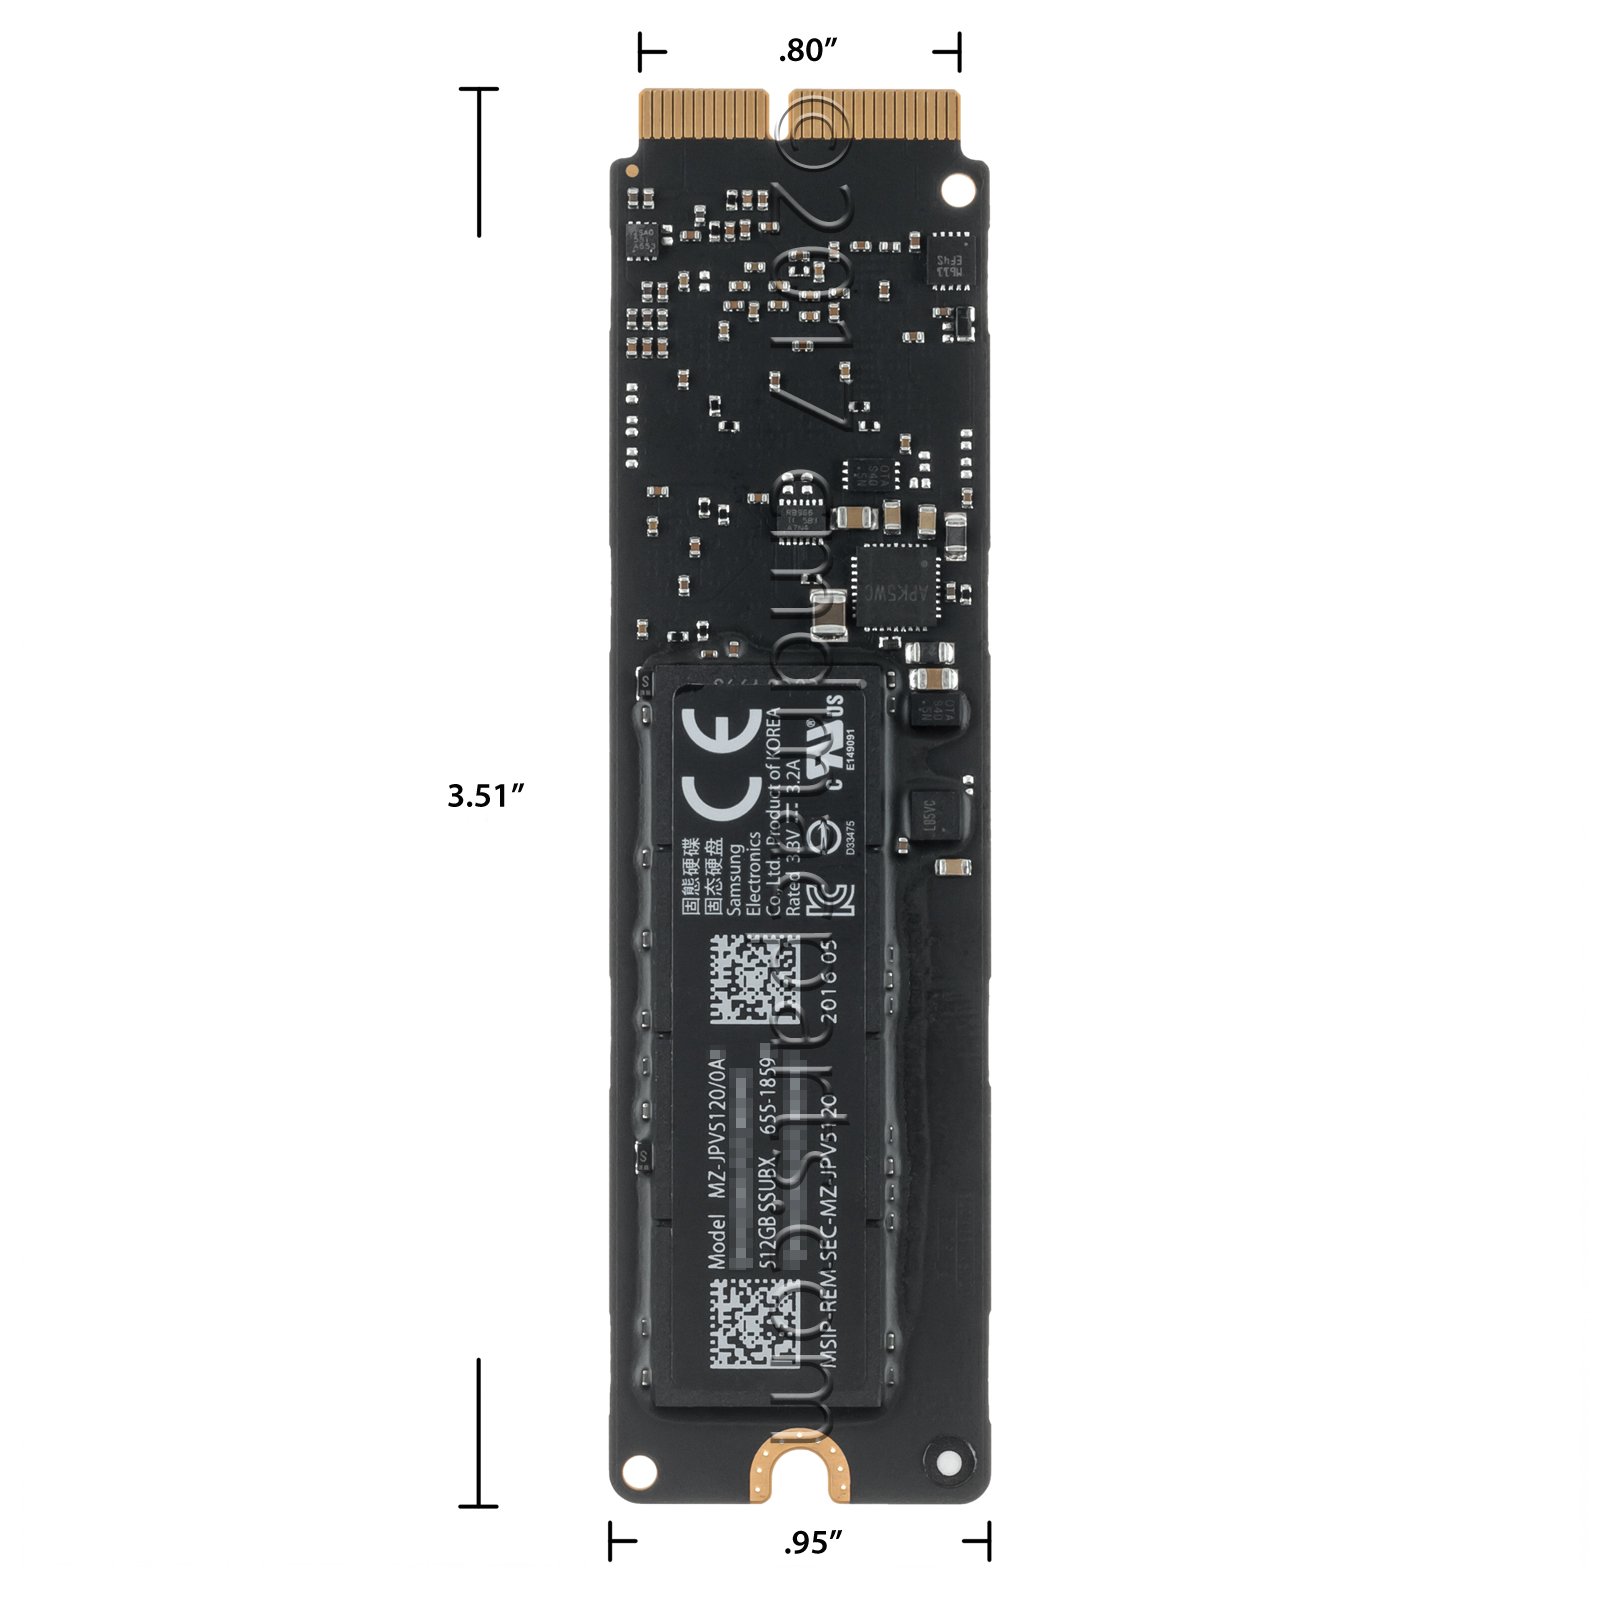 Odyson - 512GB SSD (PCIe 3.0 x4, SSUBX) Replacement for MacBook Air 13